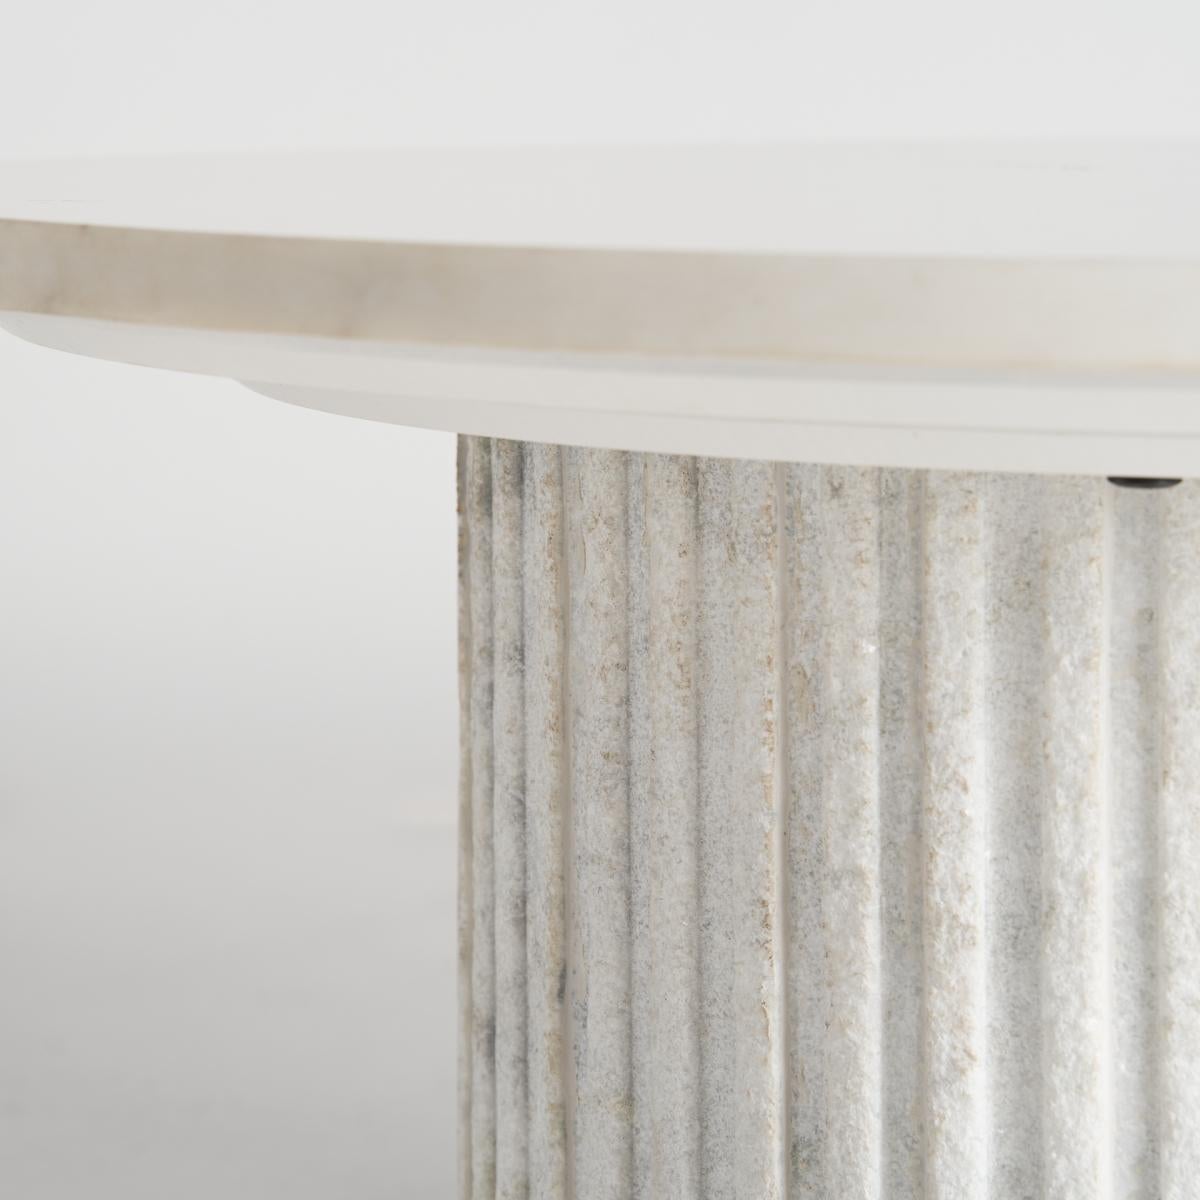 Hand-Crafted In-Stock, Art Deco Style Nesting Marble Tables For Sale